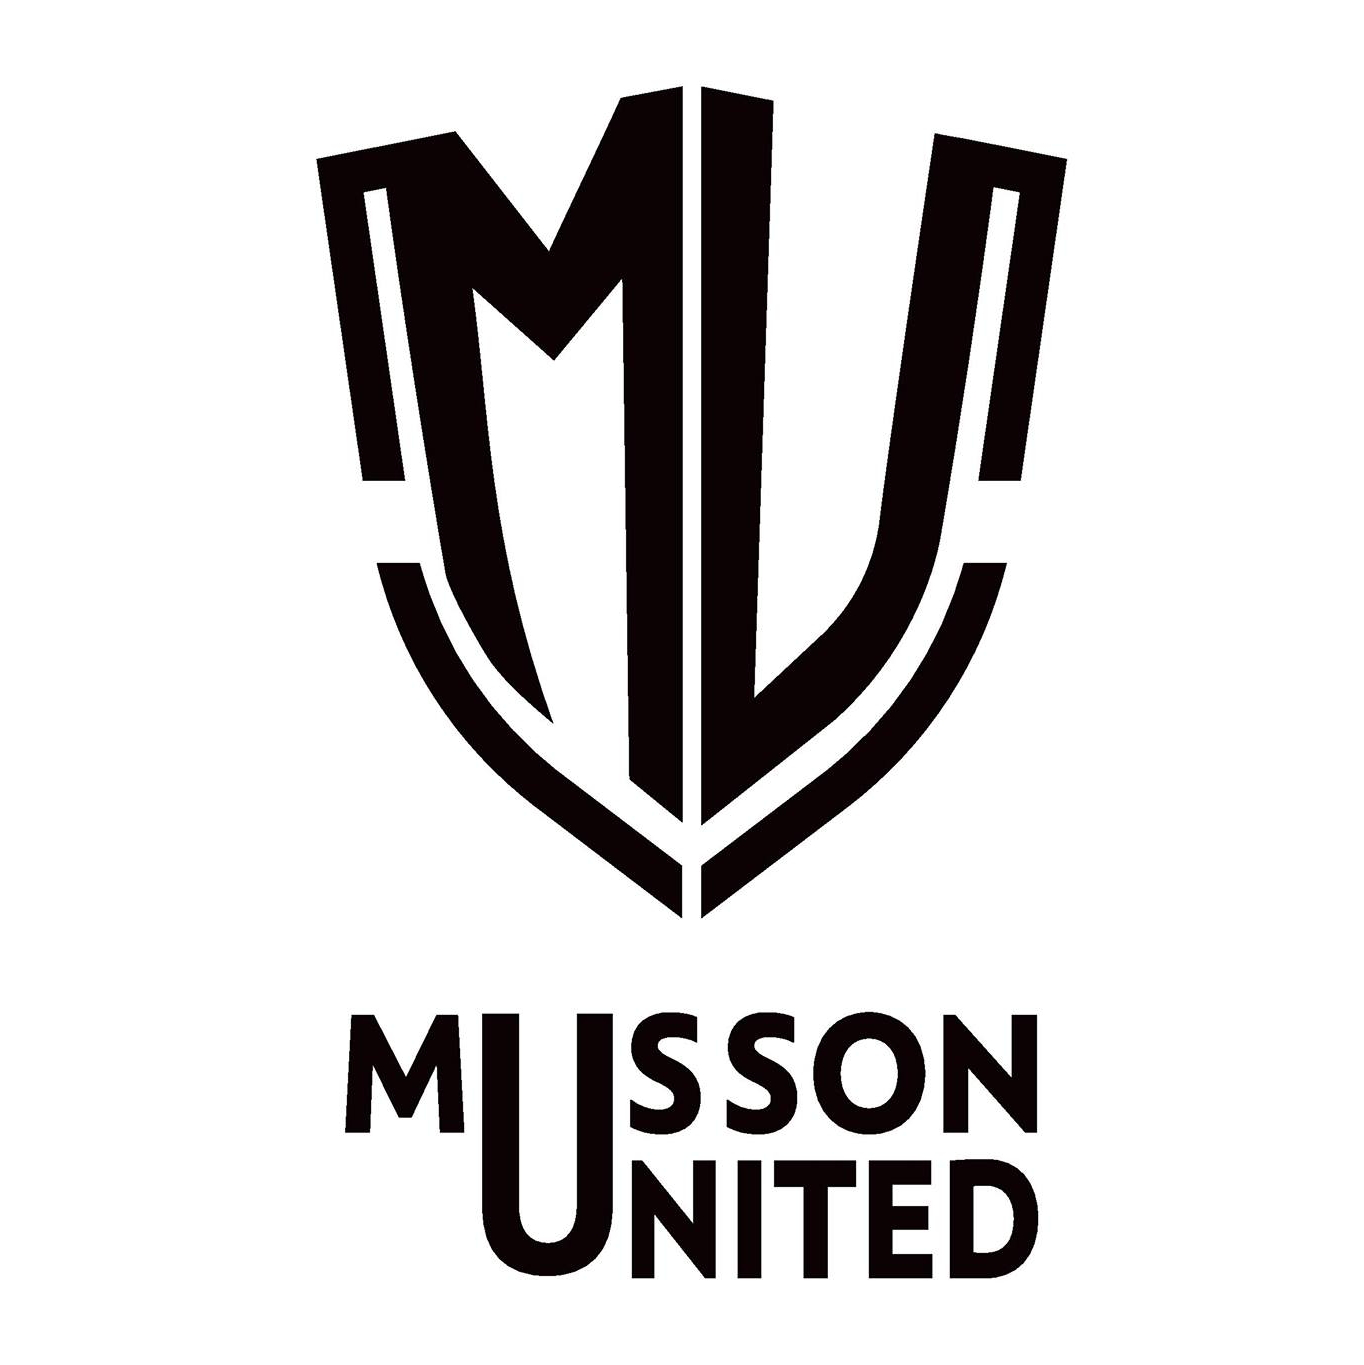 Musson United